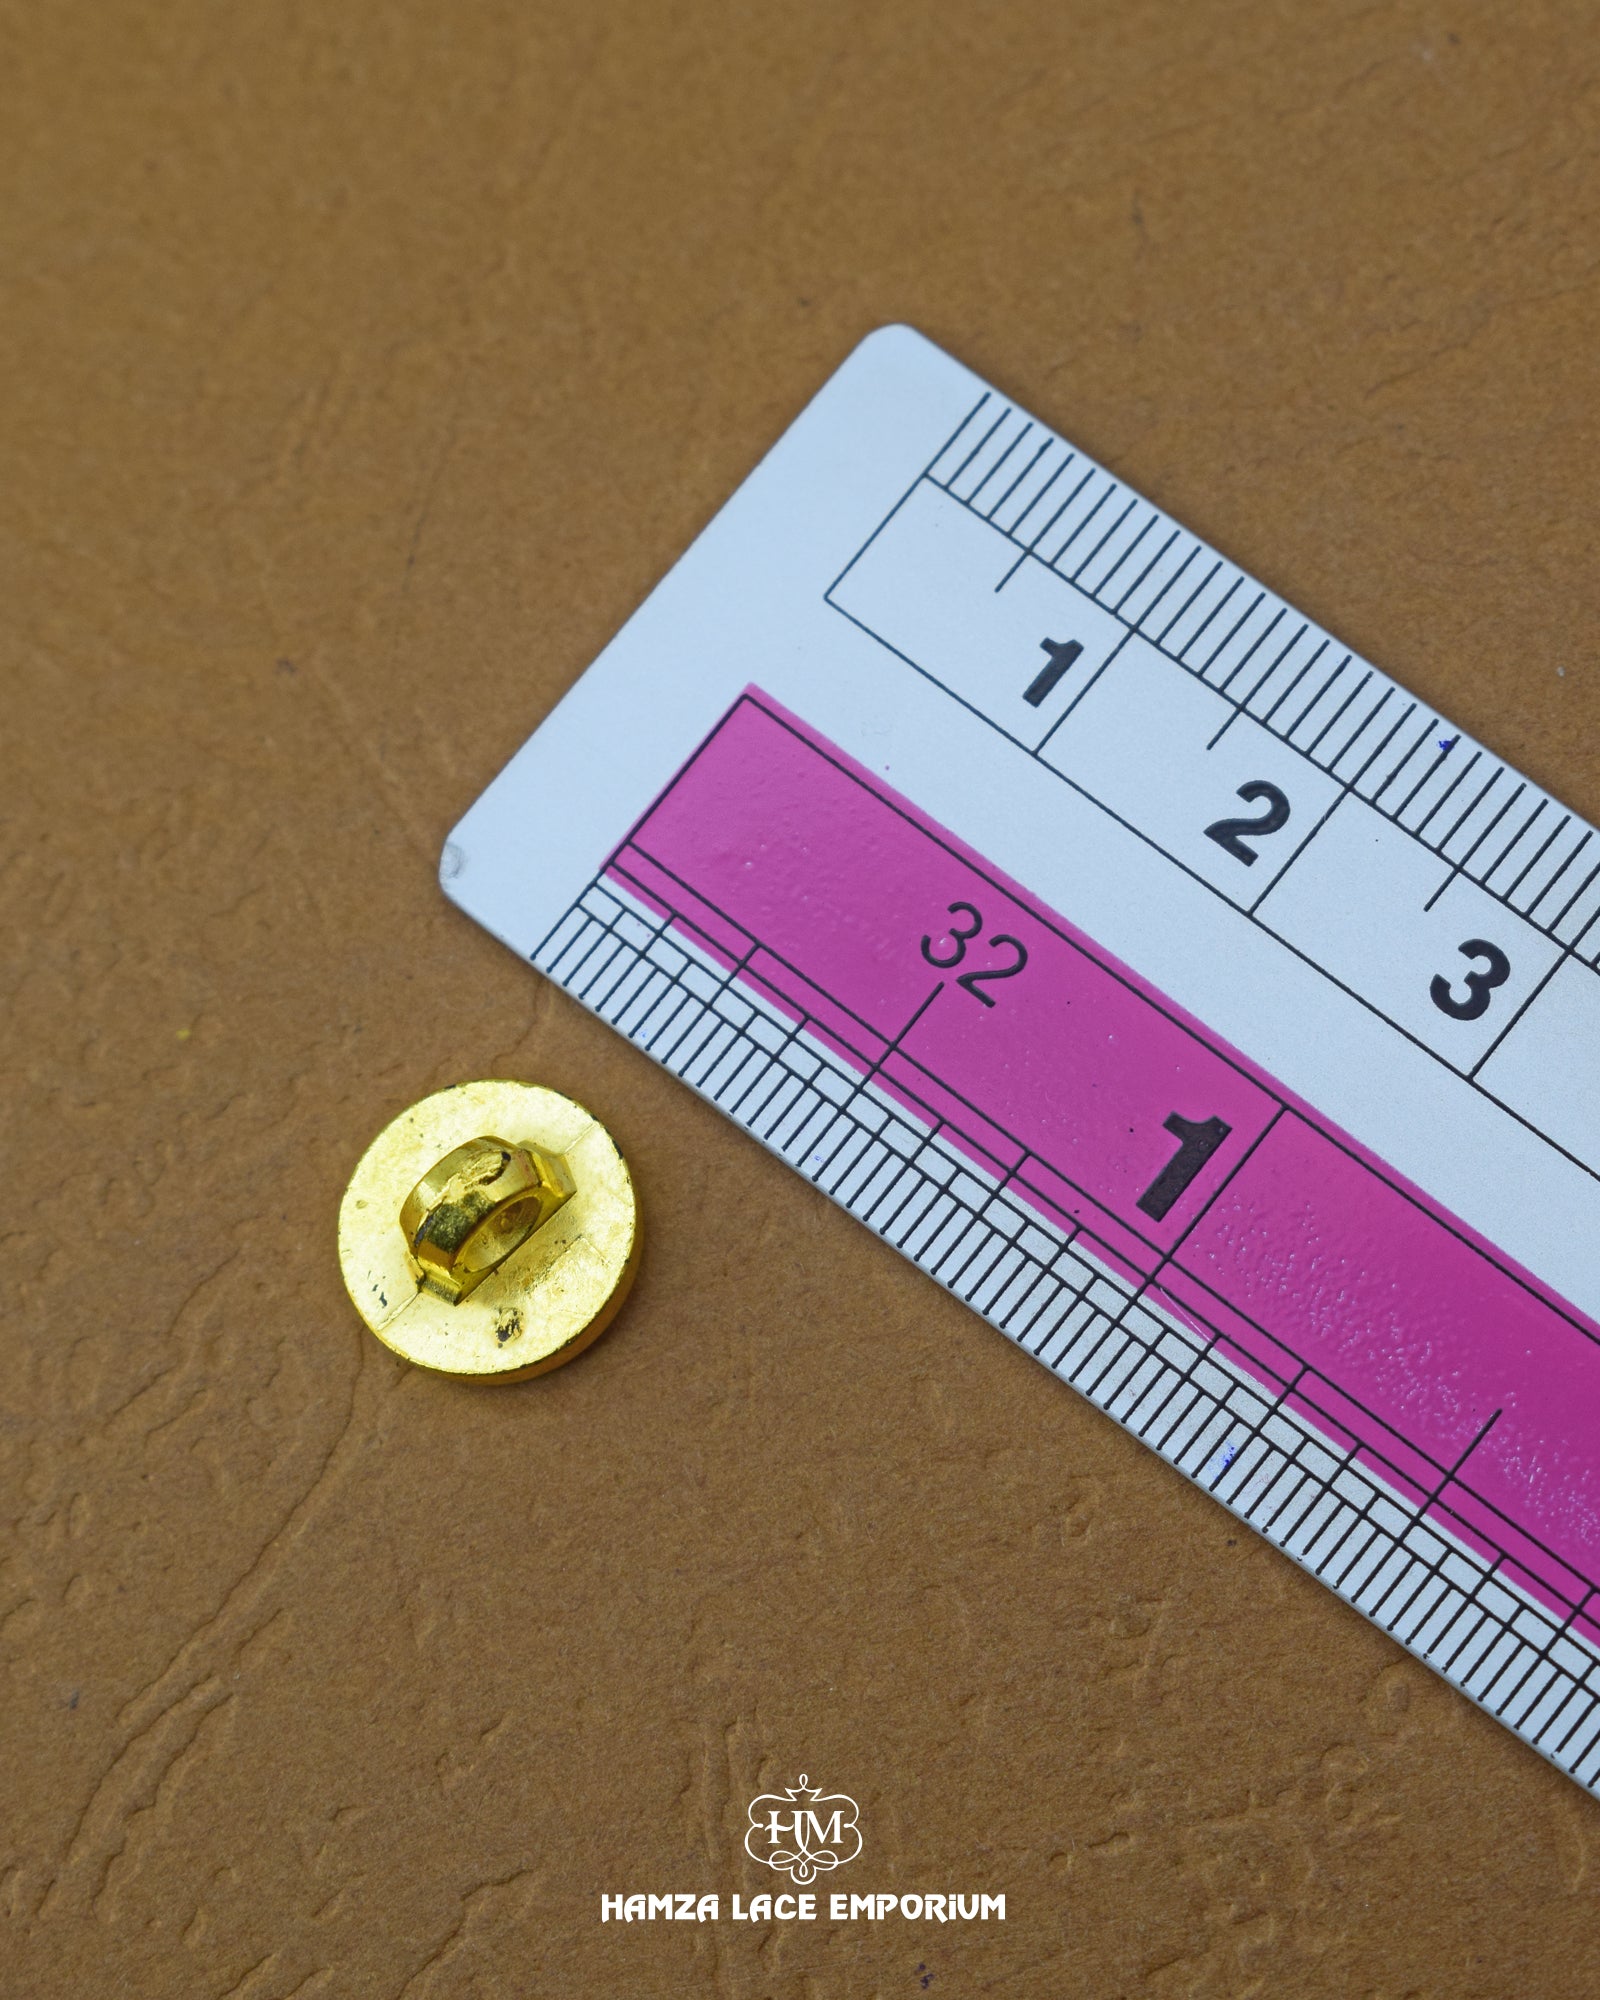 The size of the 'Golden Metal Button MB857' is measured using a ruler.